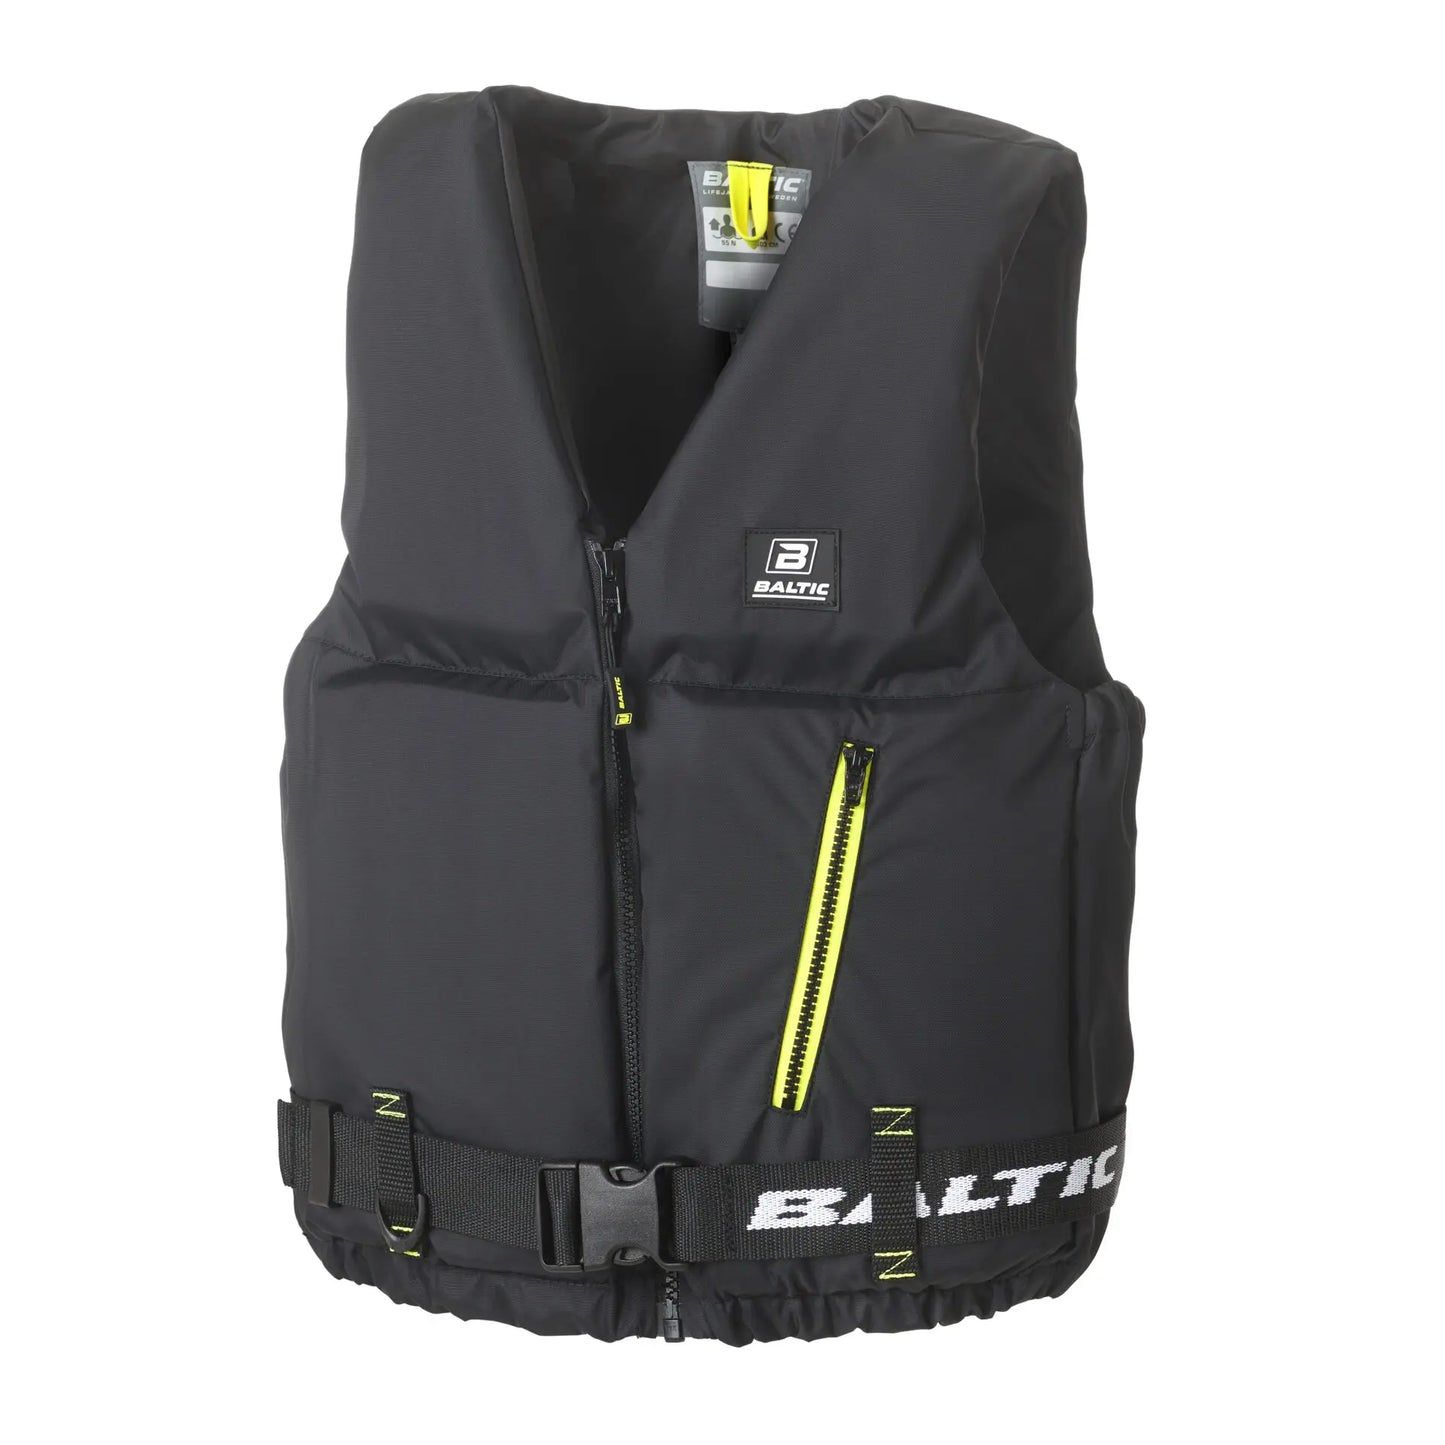 Axent Buoyancy aid